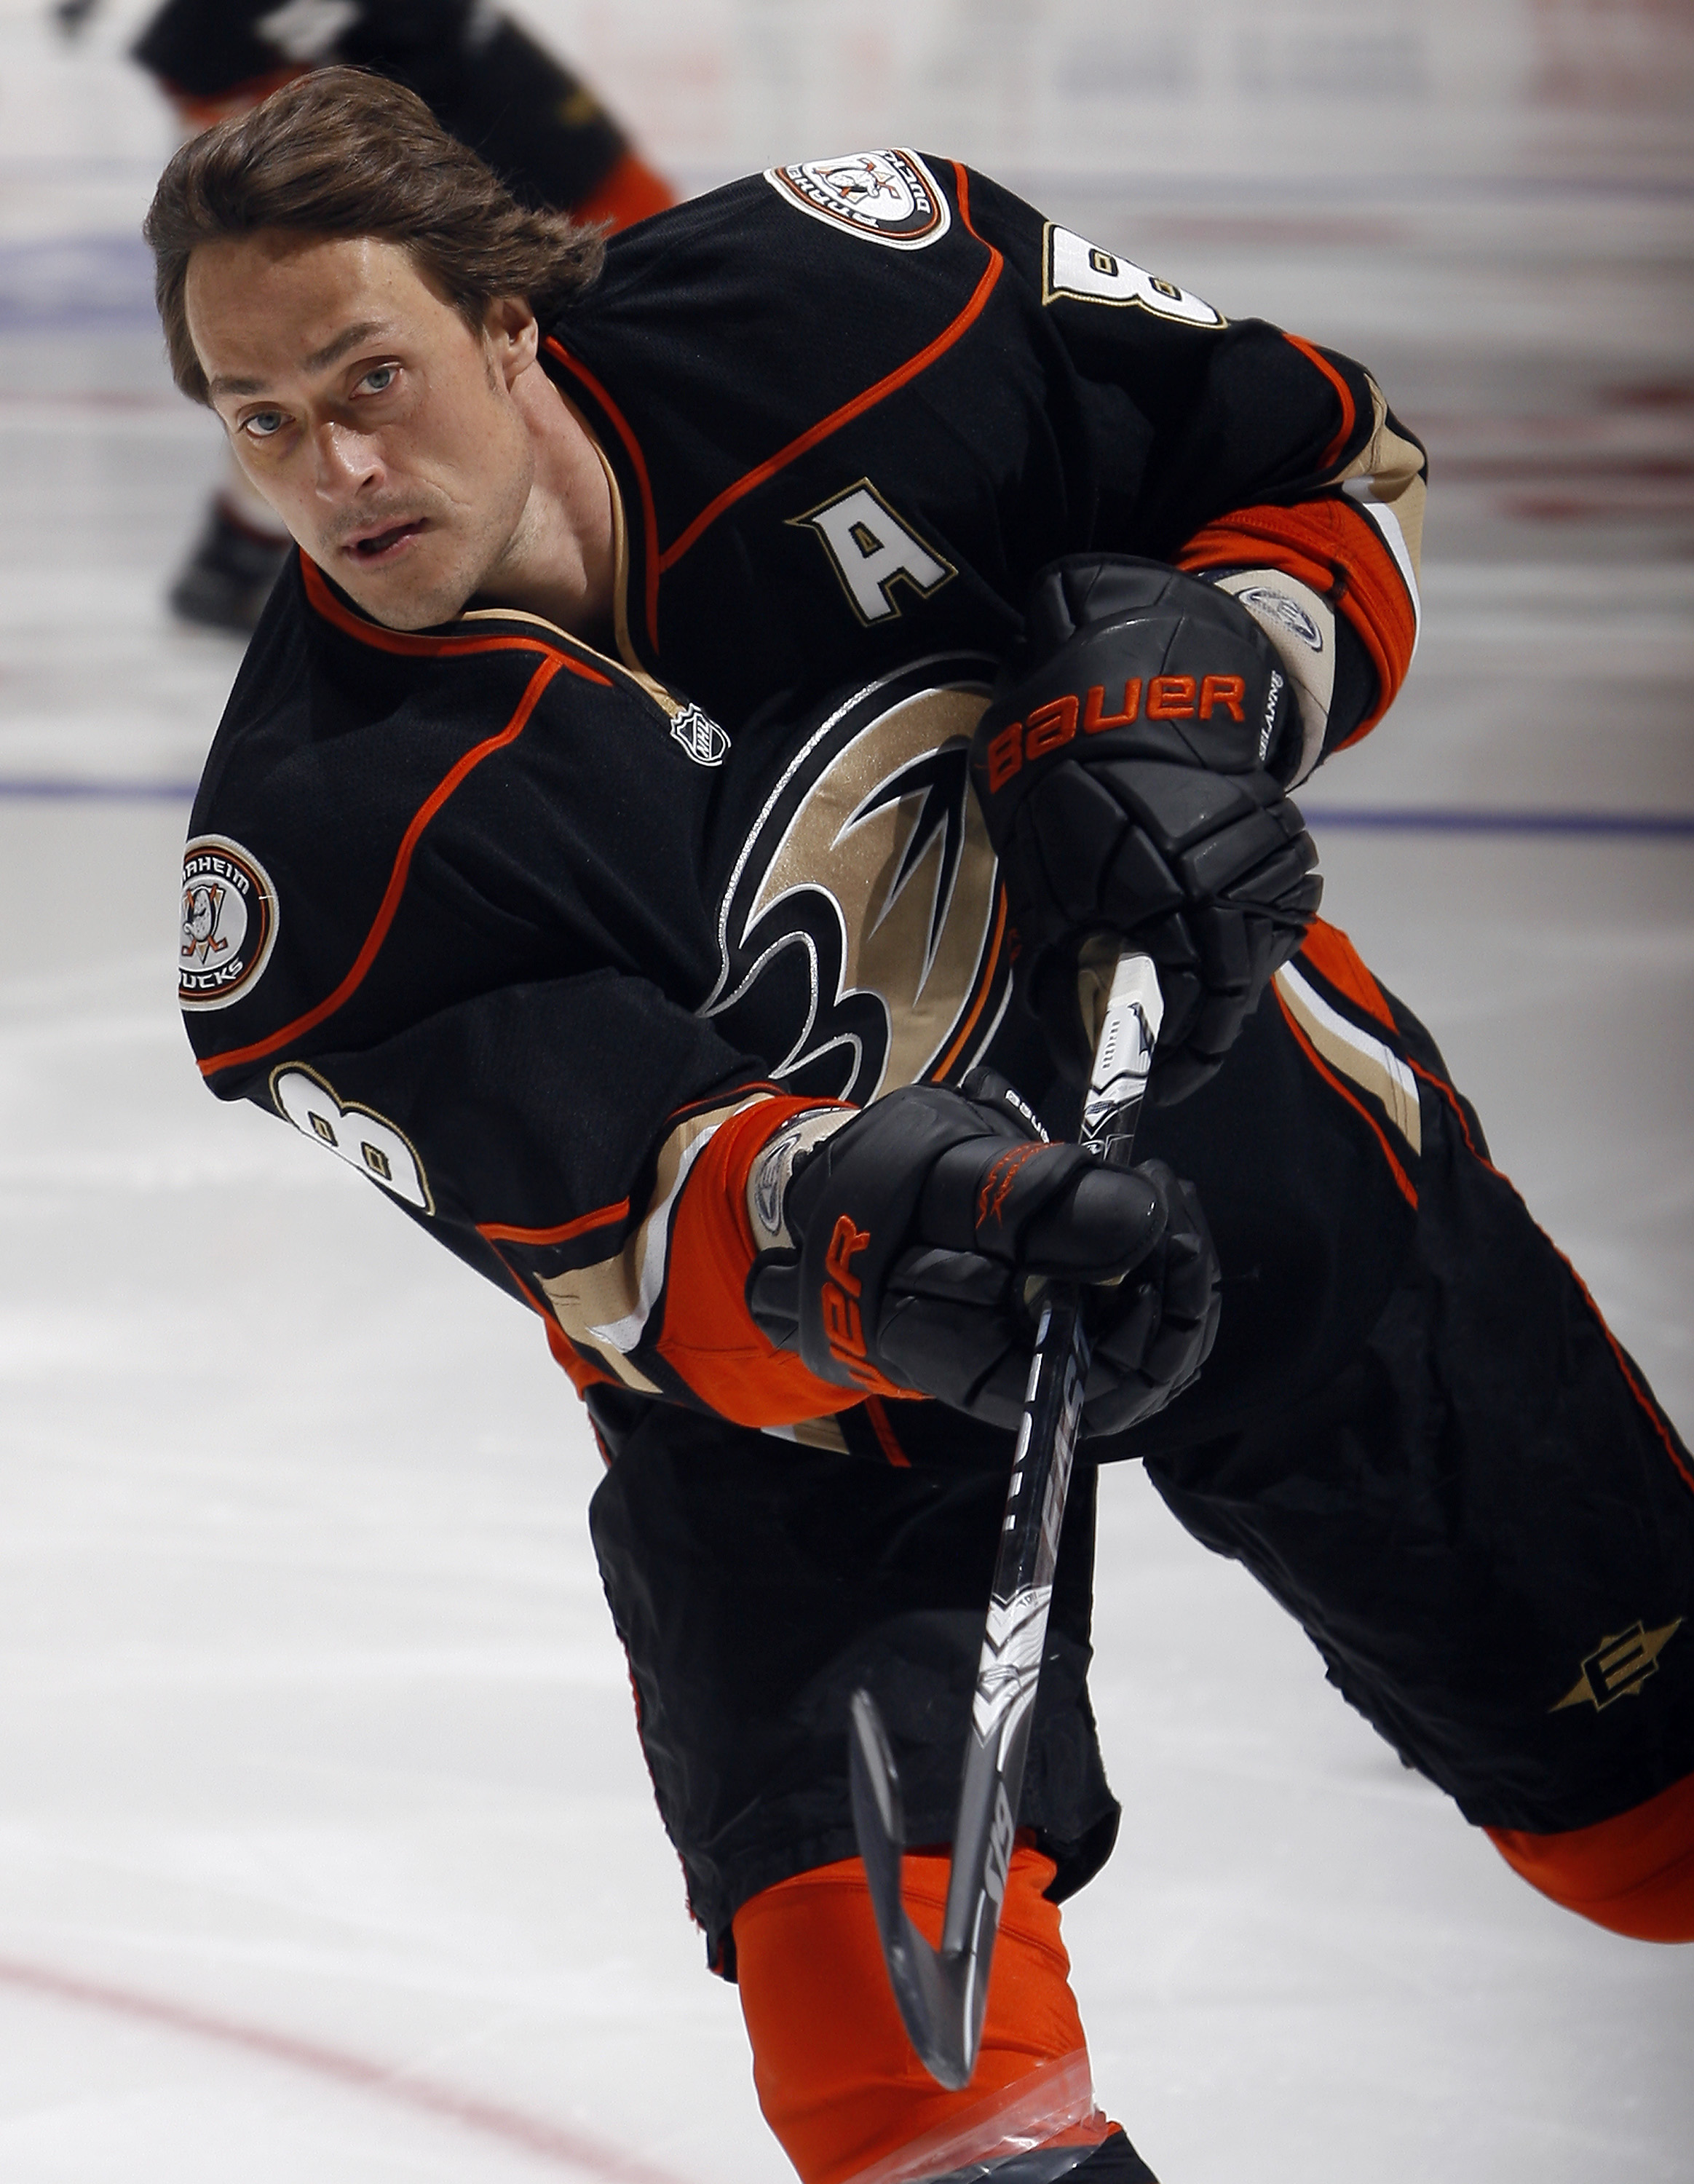 A Selanne jersey for every day of the week! : r/AnaheimDucks